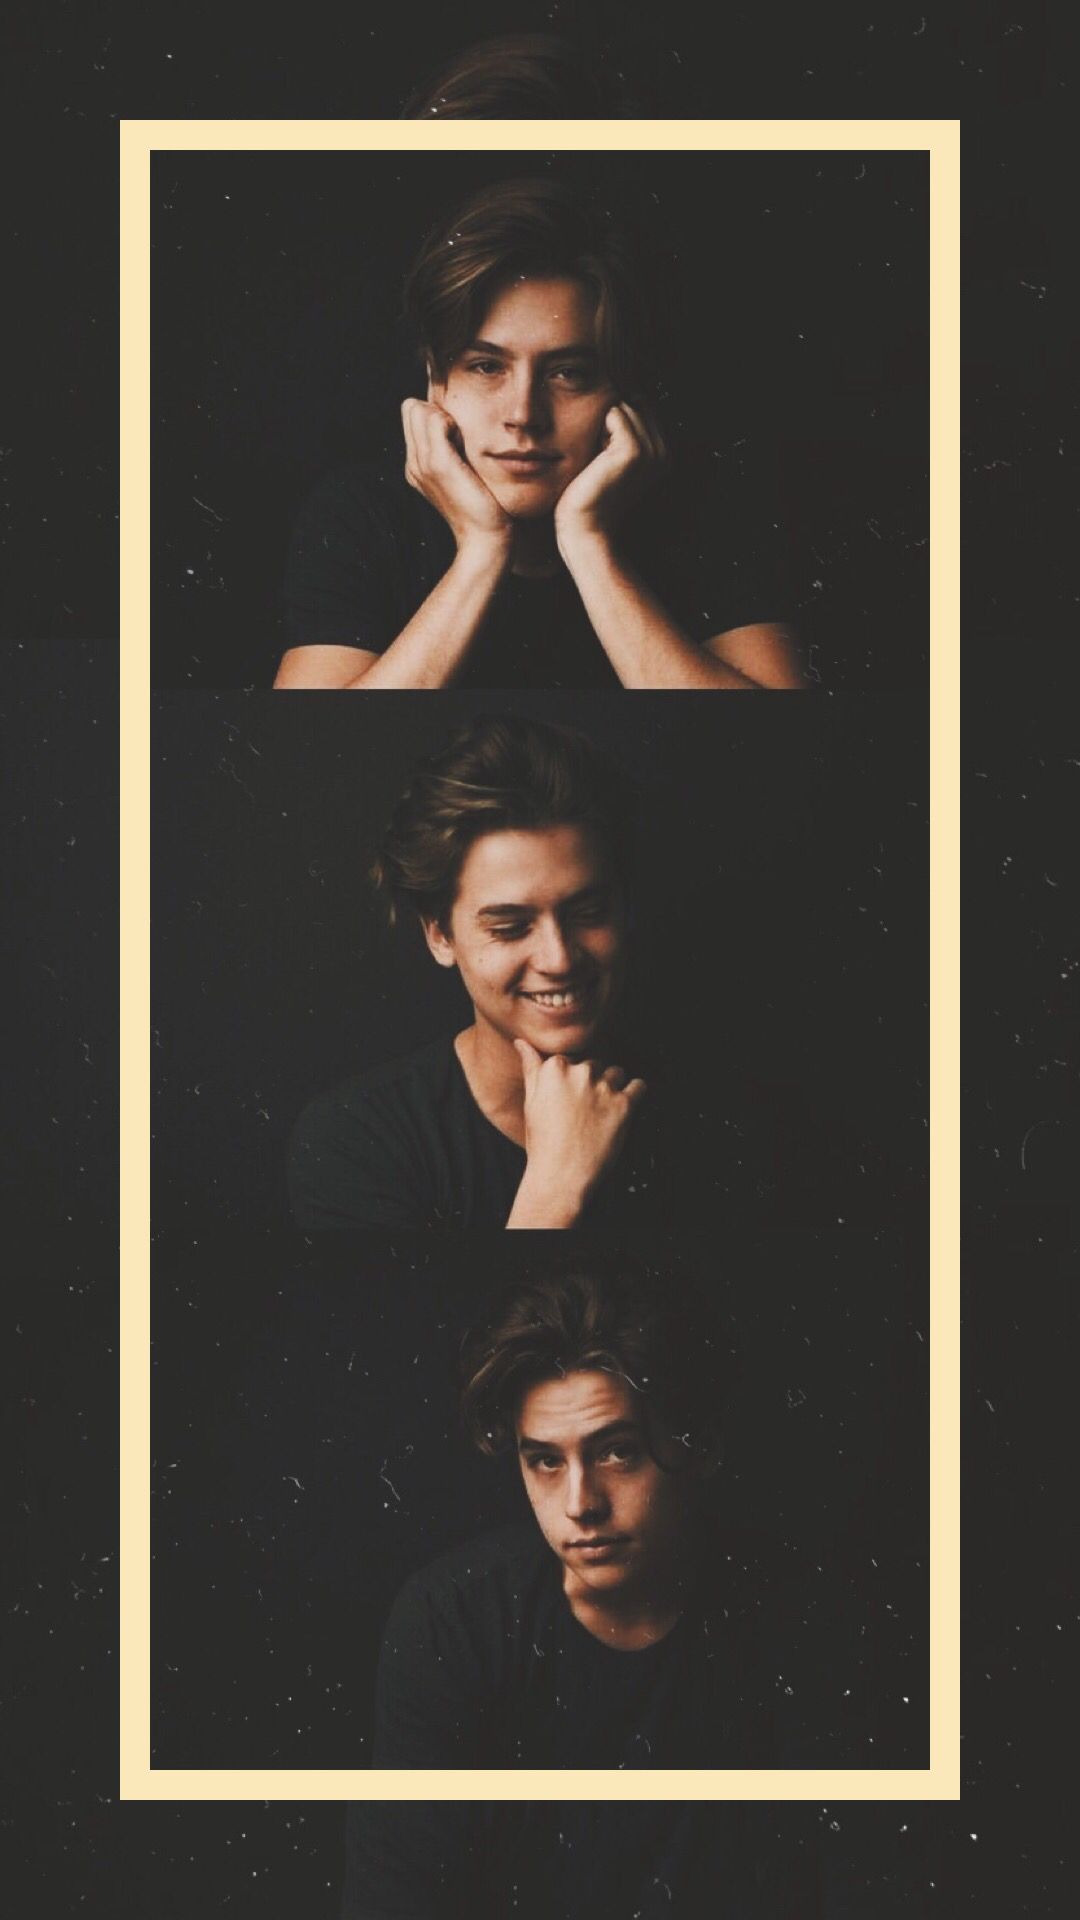 Cole Sprouse Wallpapers